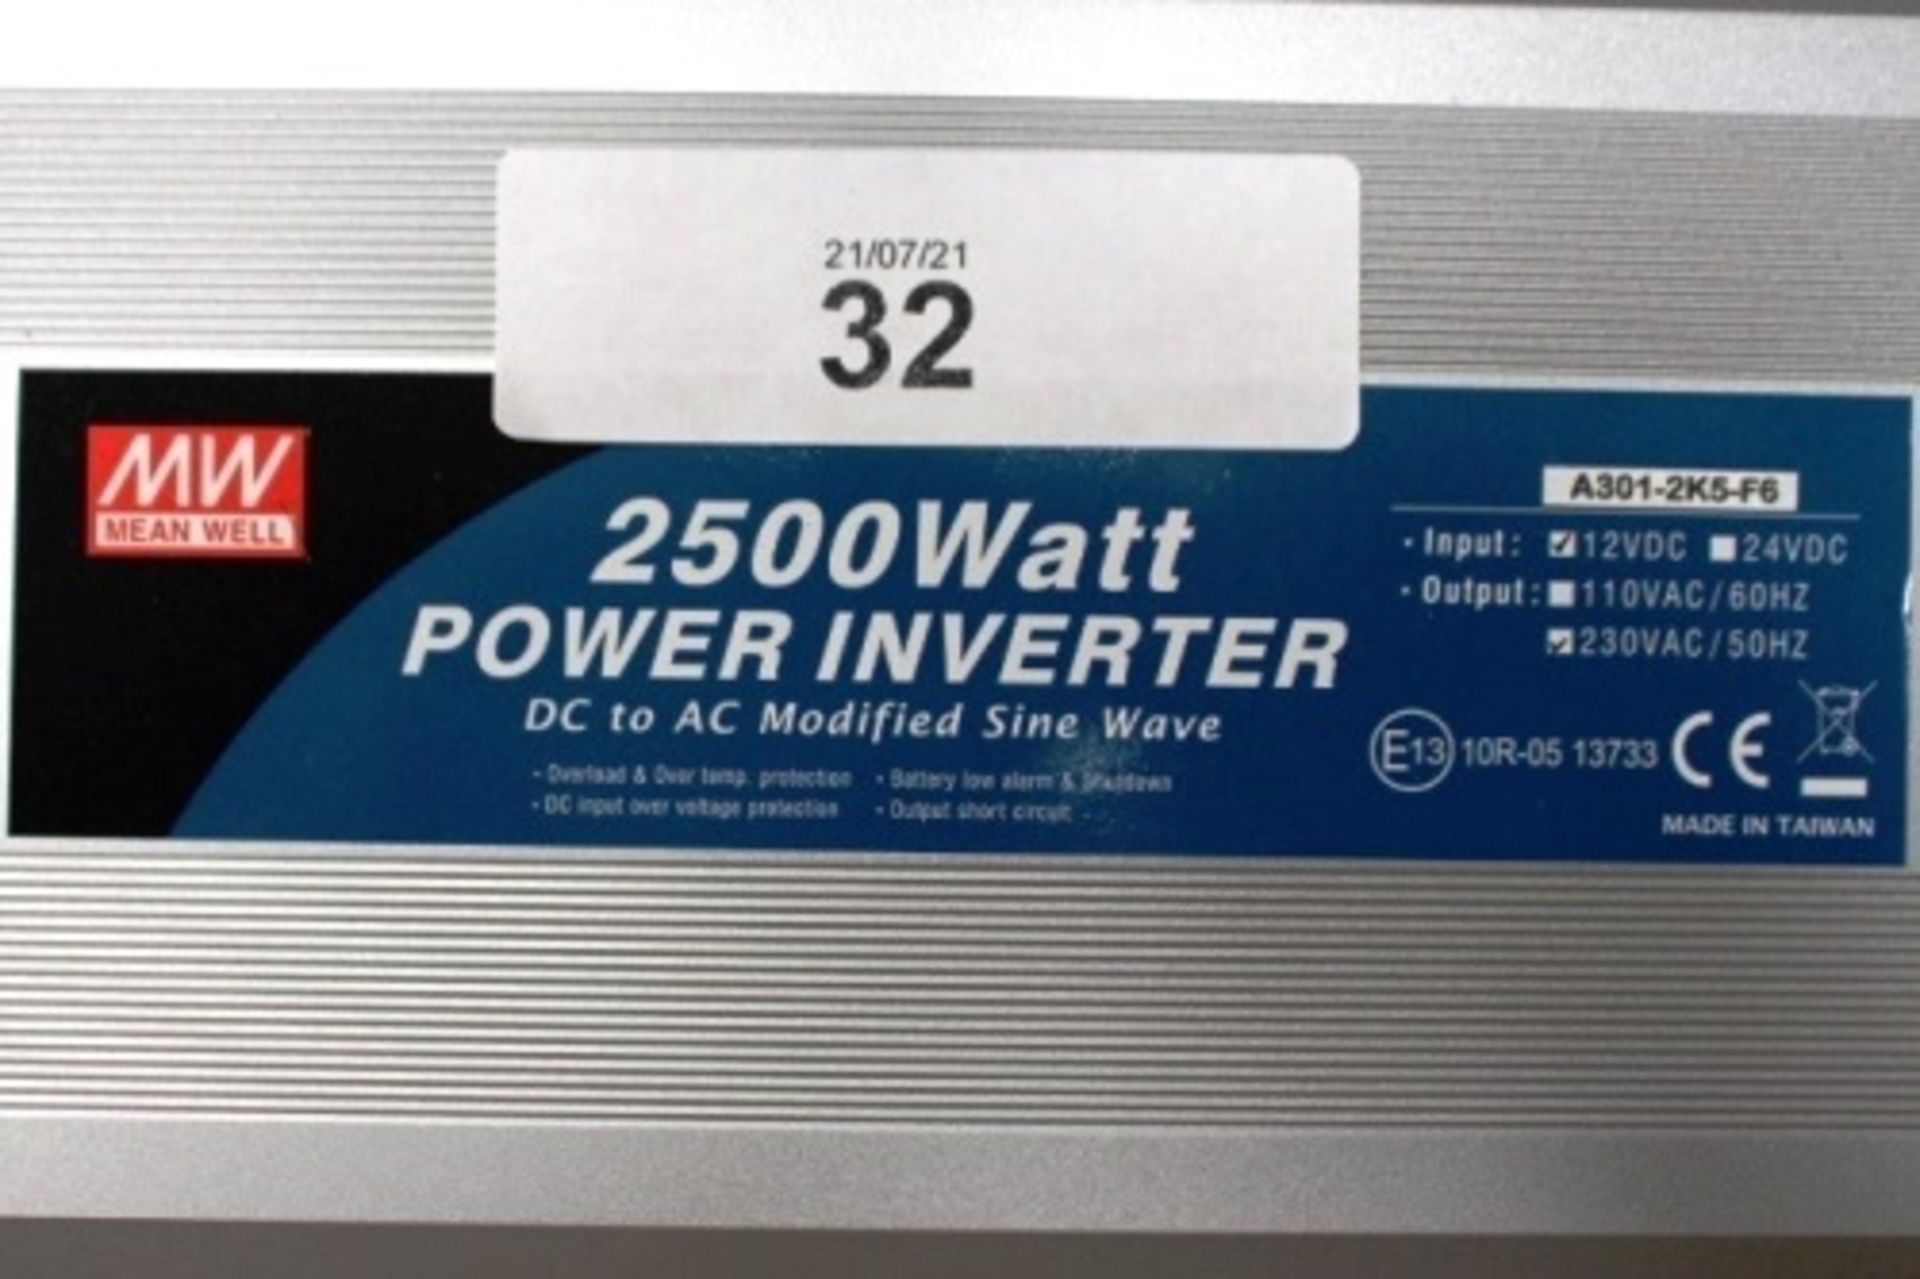 1 x Mean Well 2500W AC/DC power inverter, model A301-2K5-F6, 230 VAC, 12 VDC - New in box (ES5end)